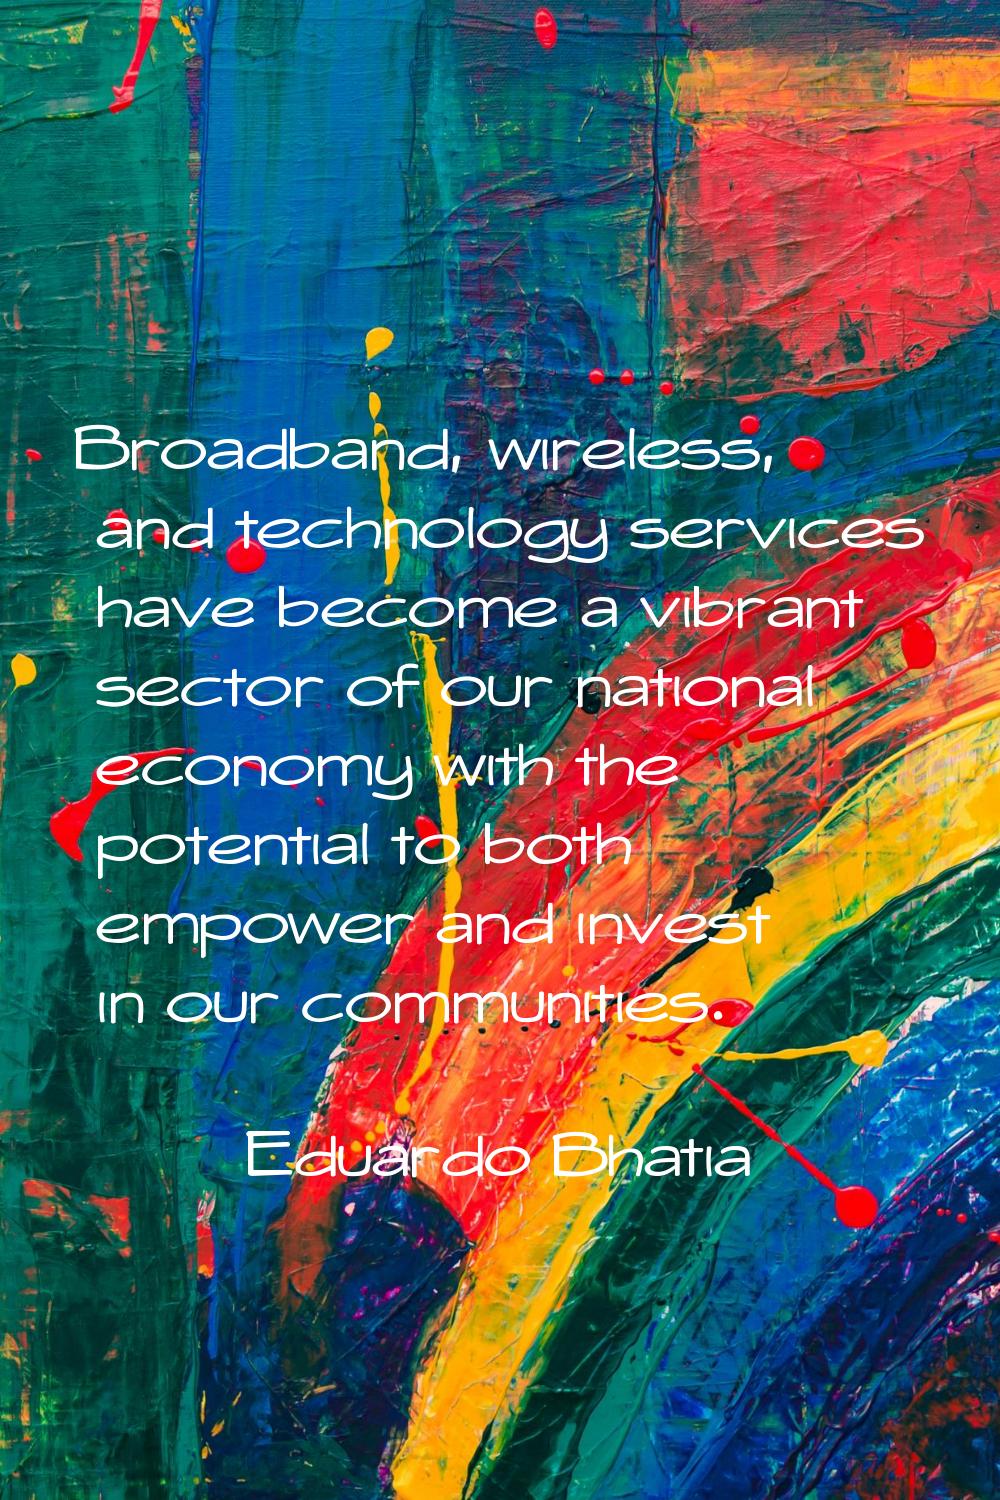 Broadband, wireless, and technology services have become a vibrant sector of our national economy w